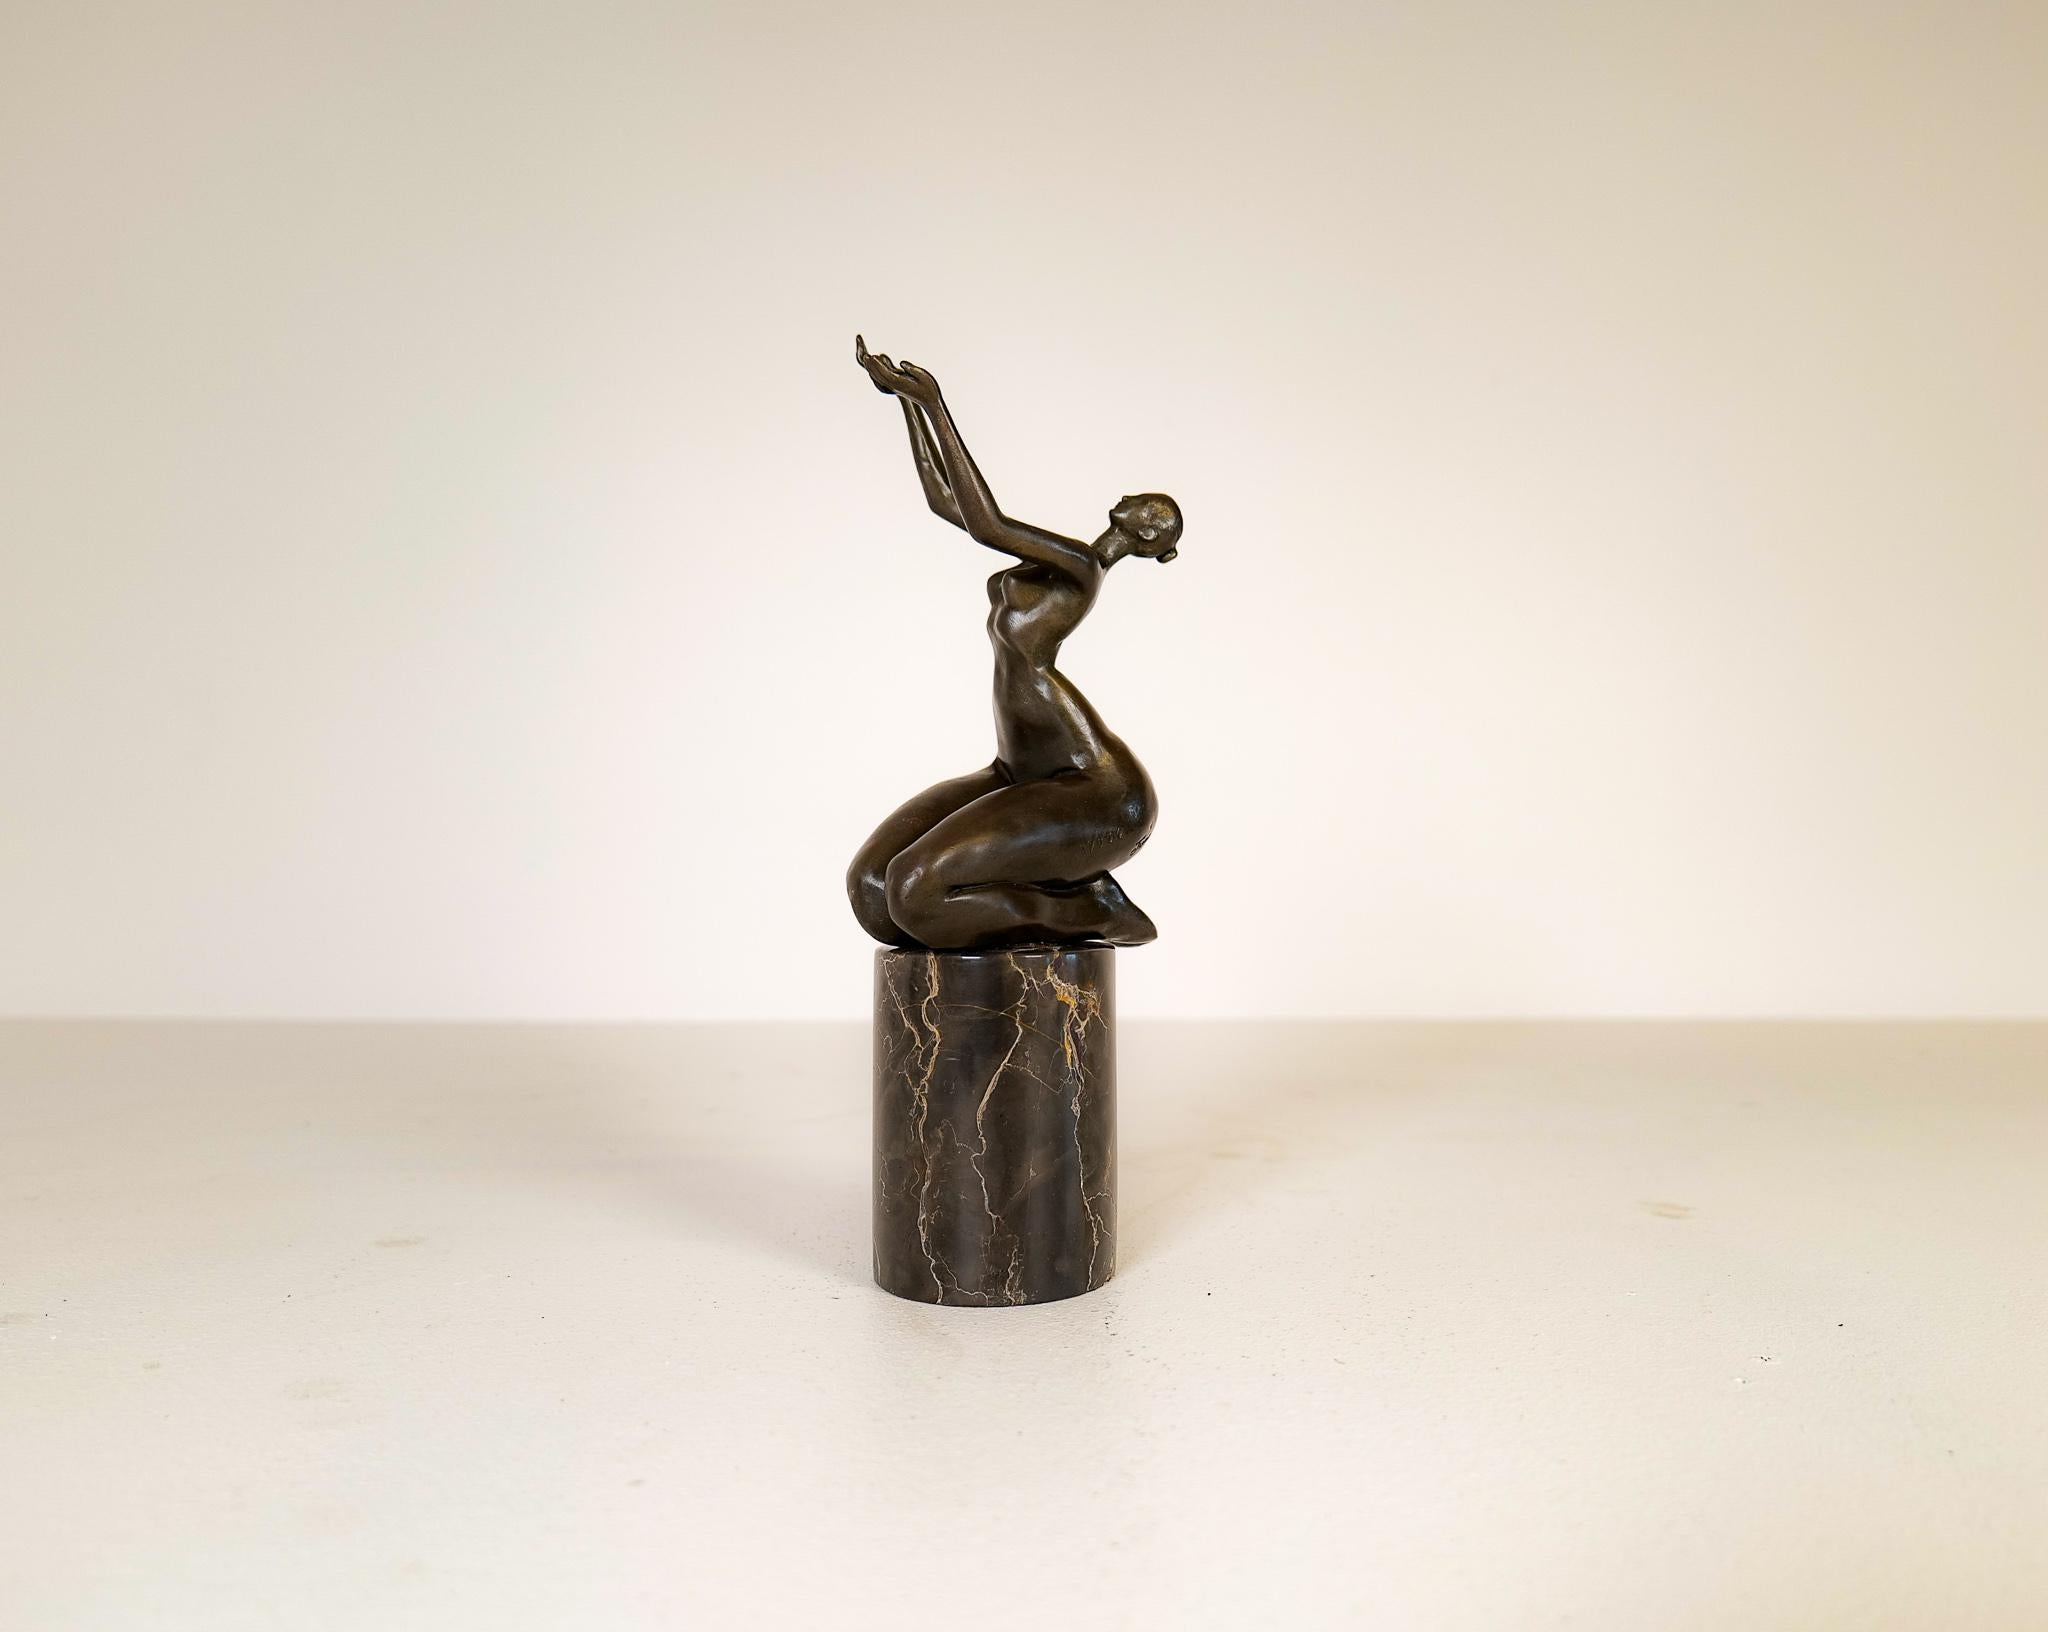 A wonderful Art Deco style sculpture of a women reaching for the sky, made in patinated bronze figurine signed J.B.Deposee / sign. Juno. The figurine is placed on a marble plinth. 

Good condition with wonderful age patina. 

Dimensions: H 33cm,